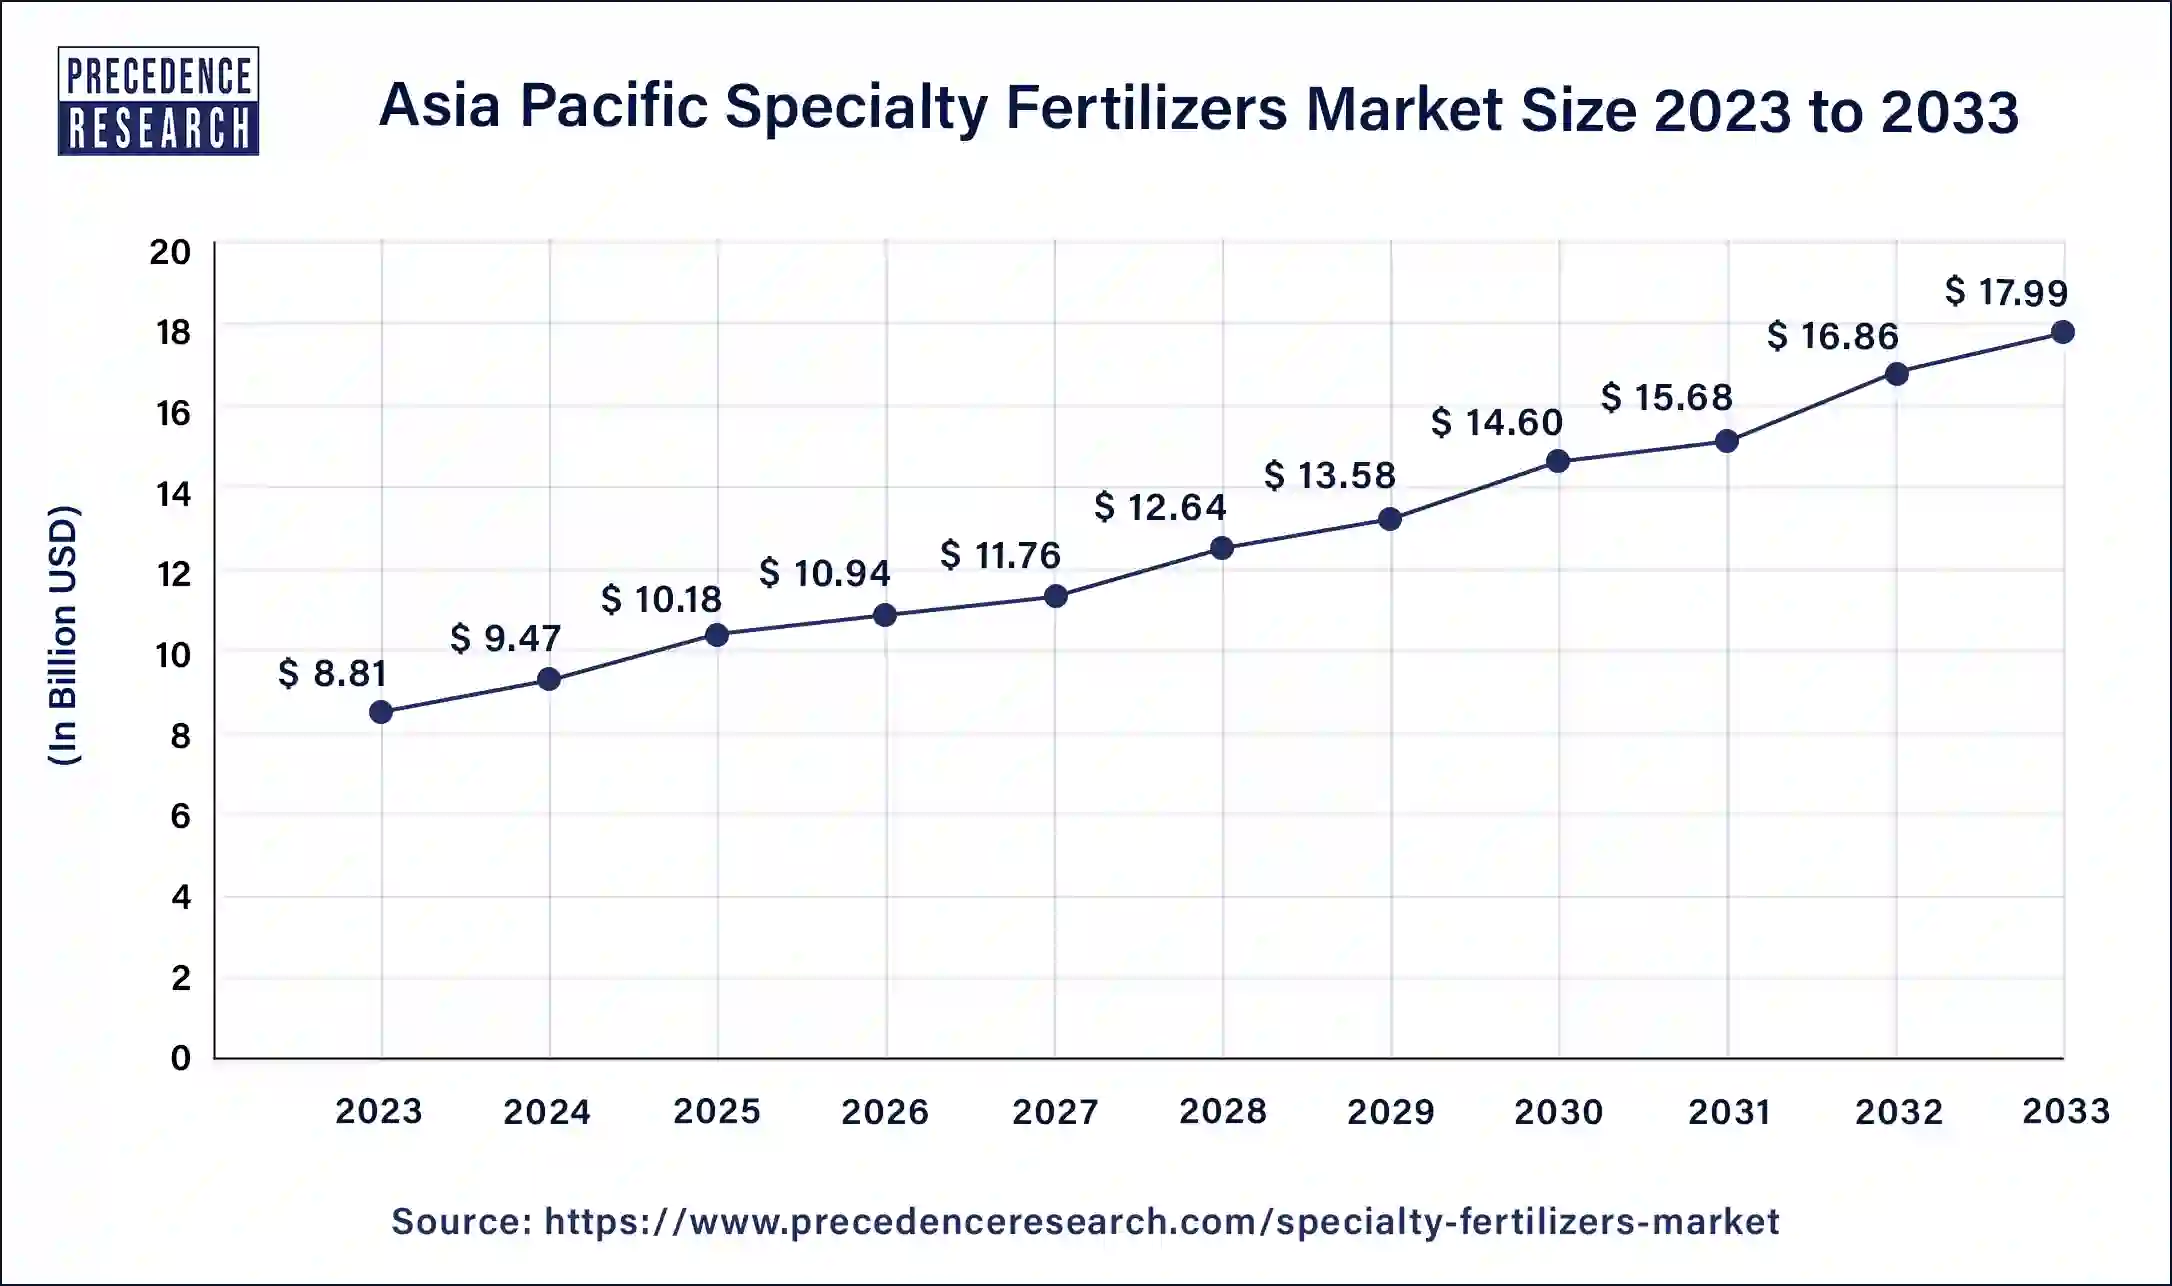 Asia Pacific Specialty Fertilizers Market Size 2024 to 2033